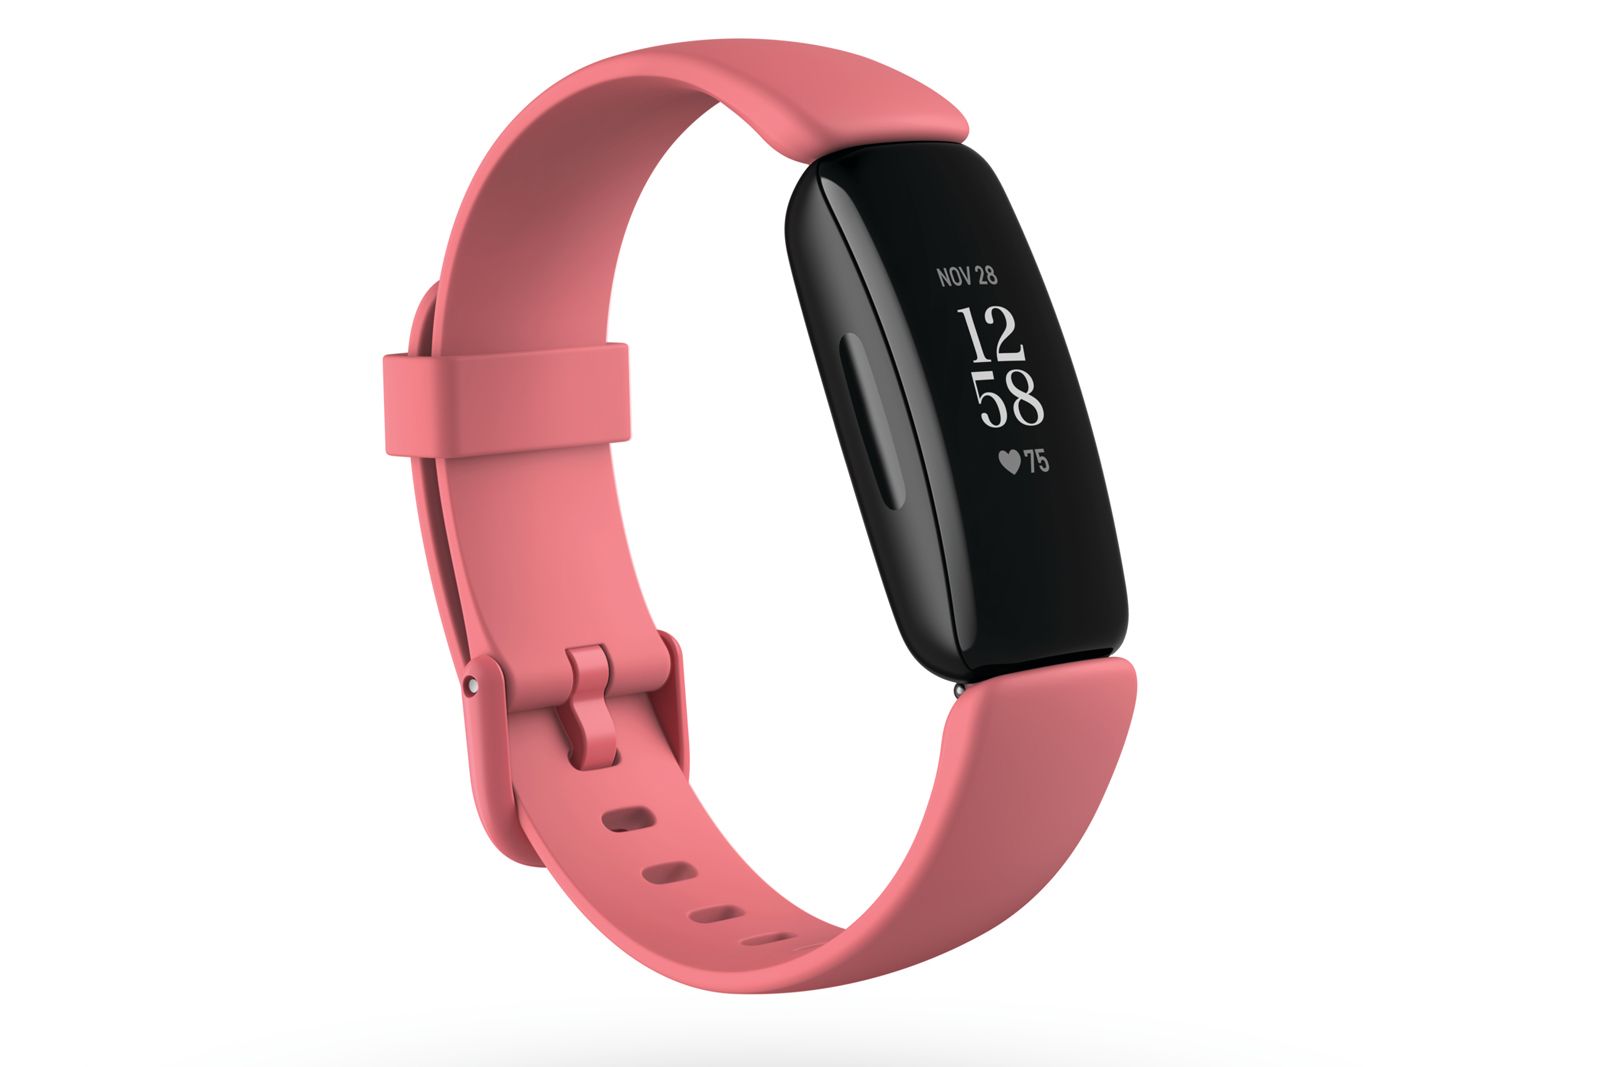 Fitbit Inspire 2 activity tracker updates design and offers 10-day battery life photo 1